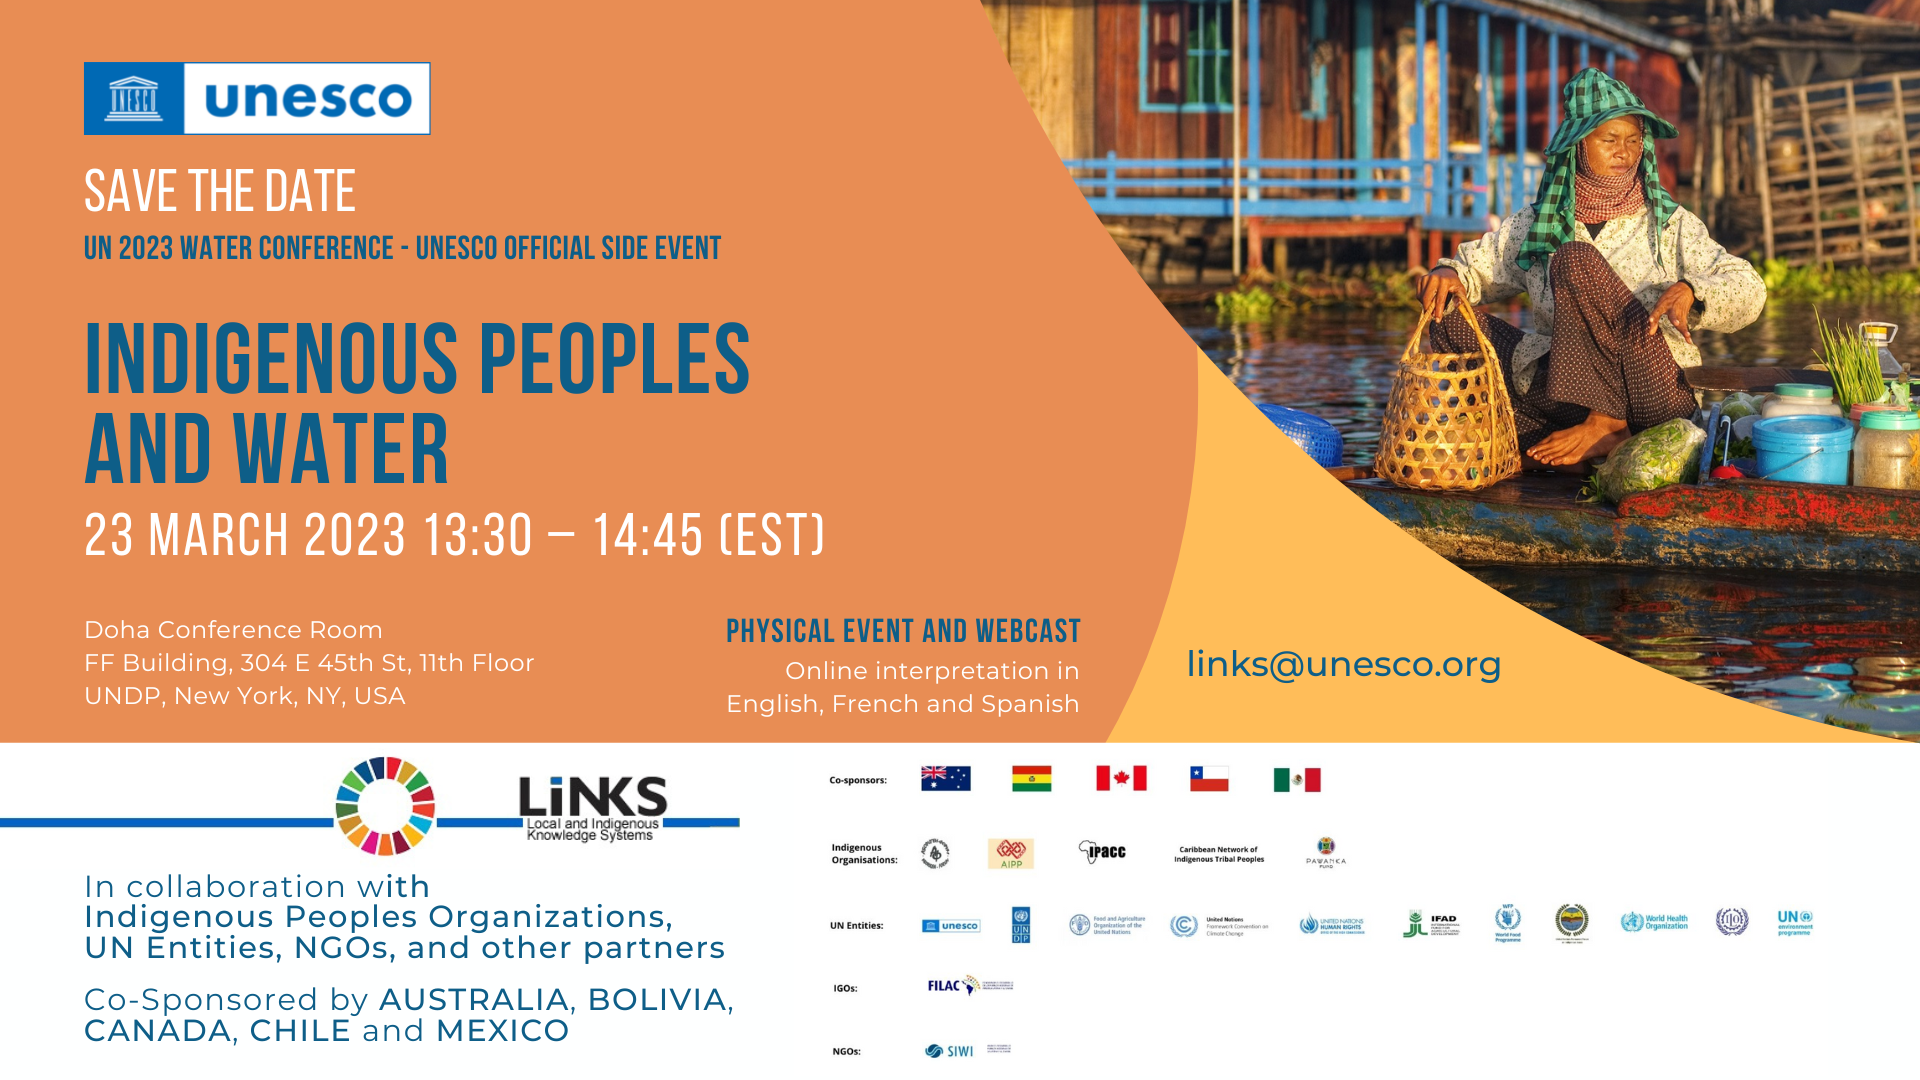 Save the Date - UN 2023 Water Conference - UNESCO Side Event - Indigenous peoples and water